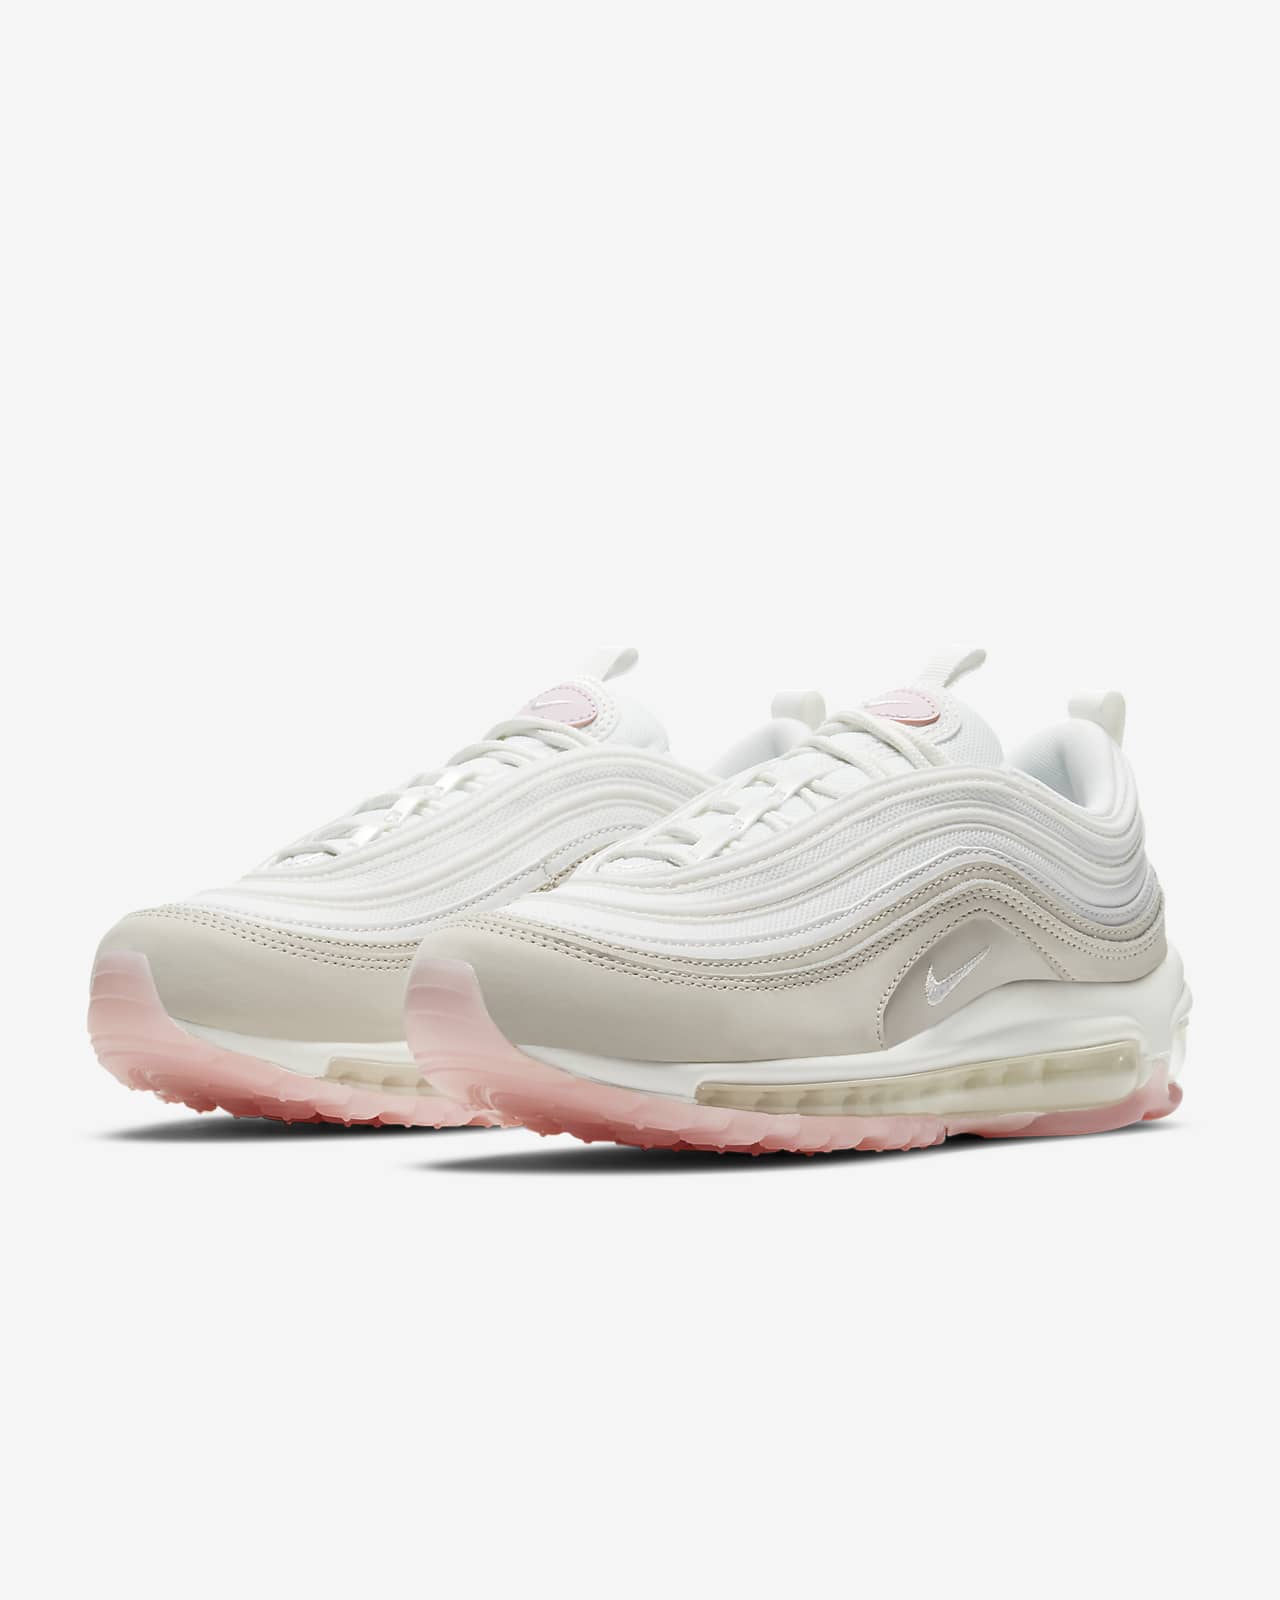 size 10 women's nike air max 97 shoes